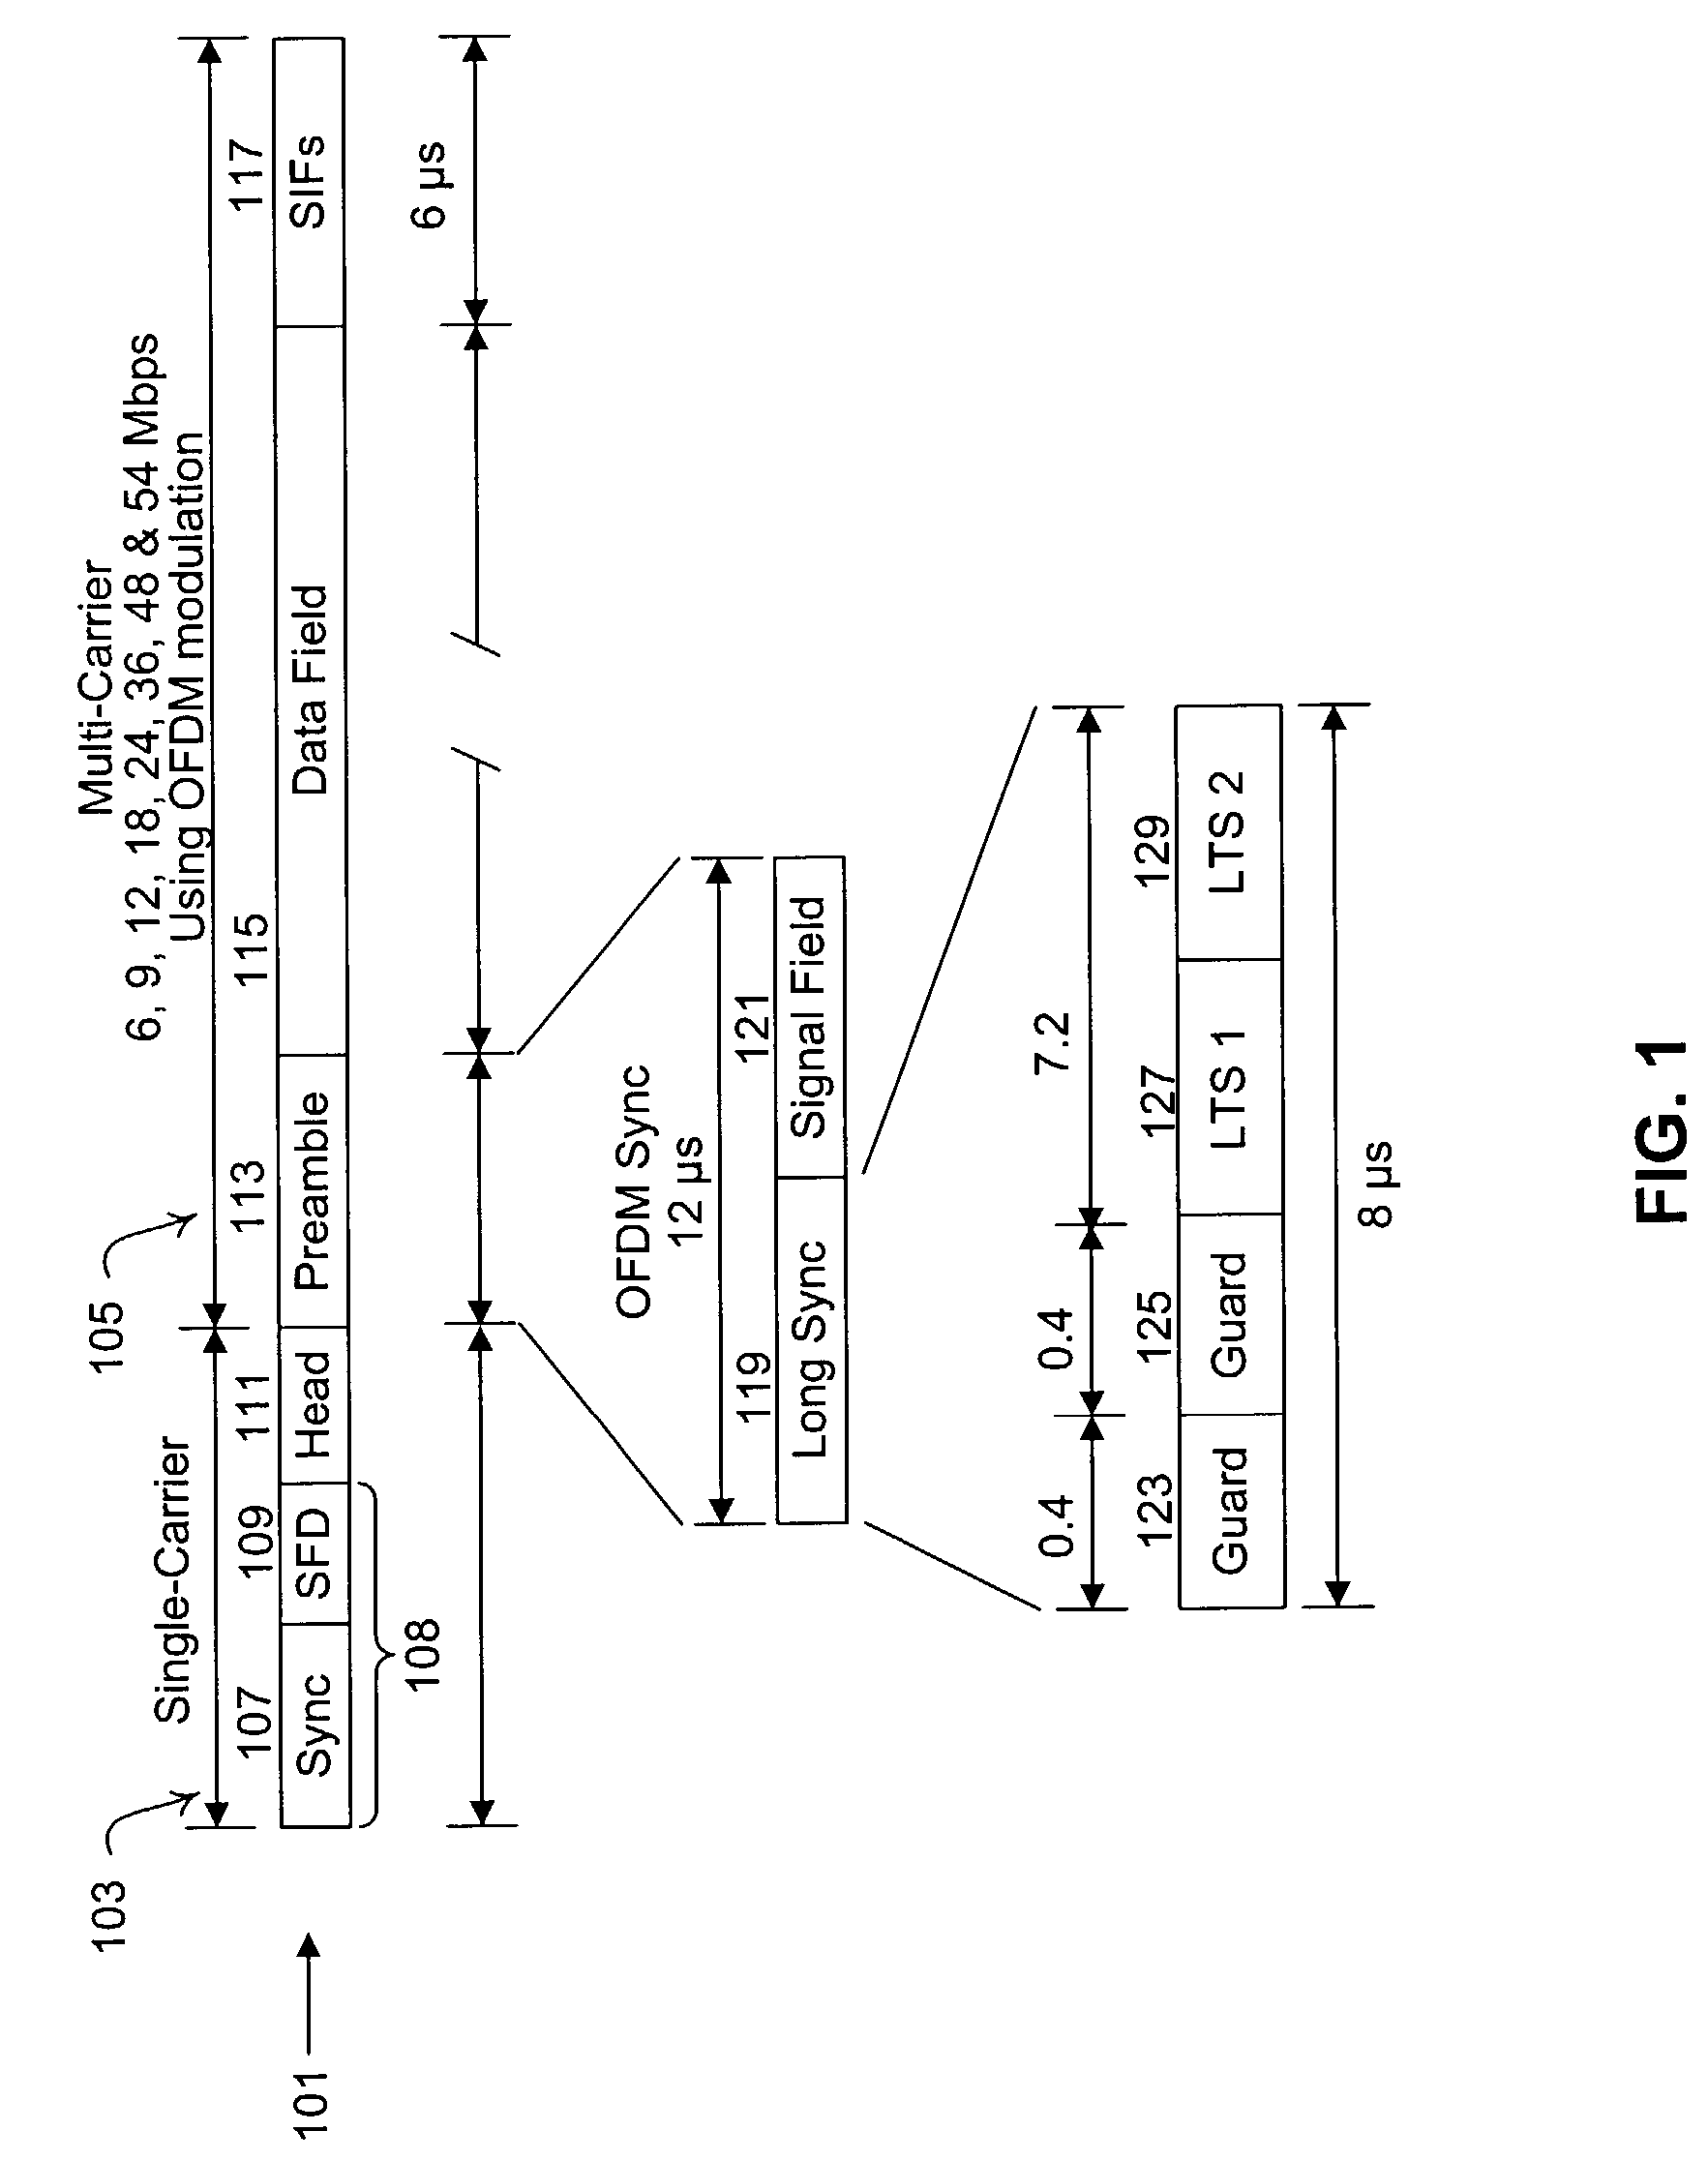 Single-carrier to multi-carrier wireless architecture